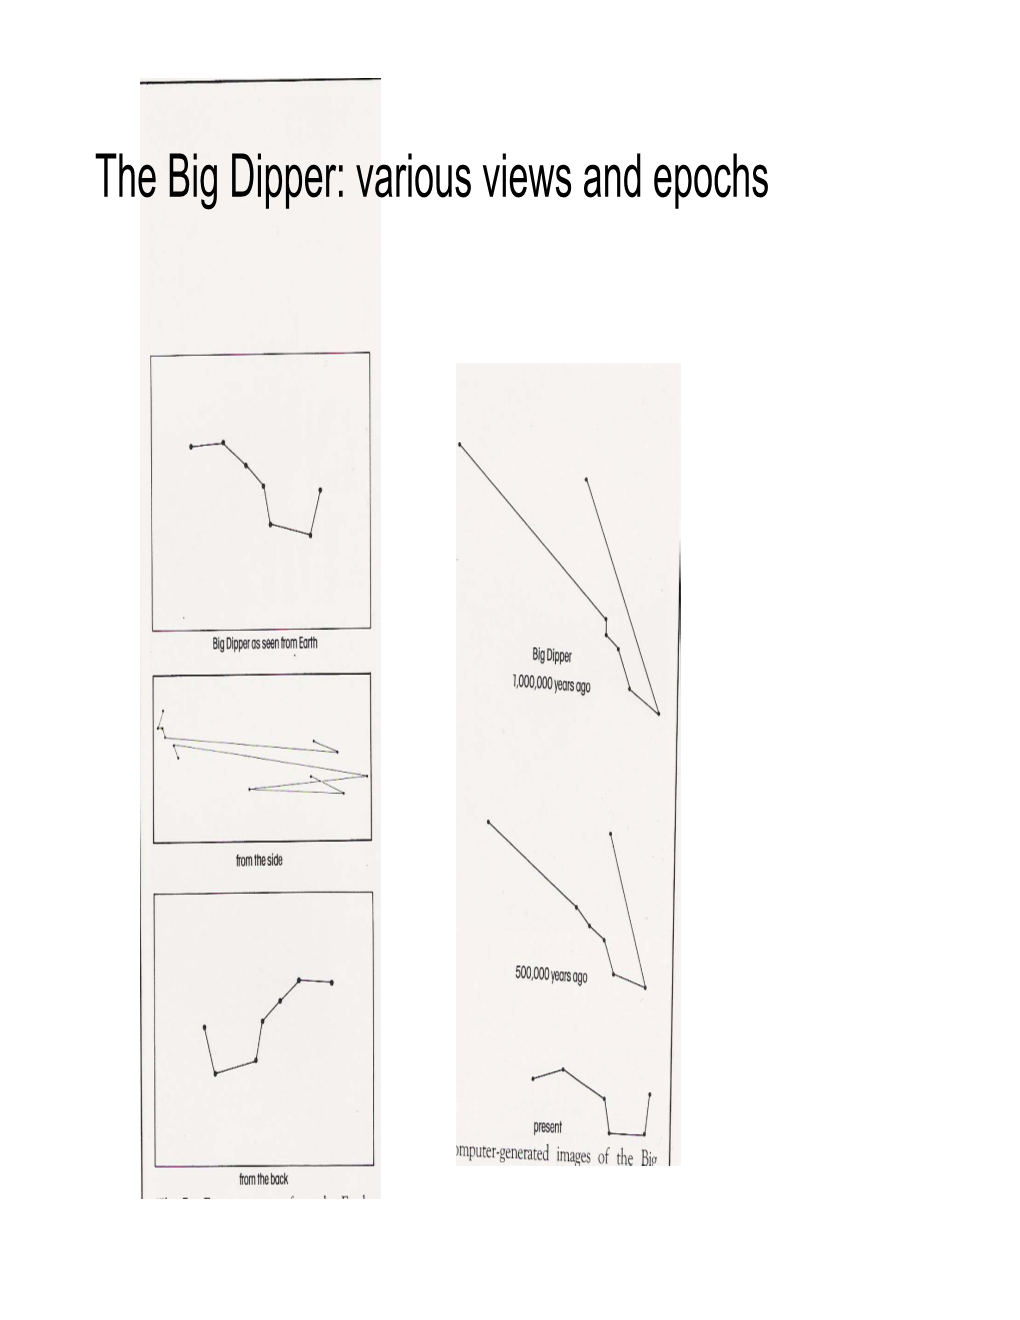 The Big Dipper: Various Views and Epochs the Celestial Sphere